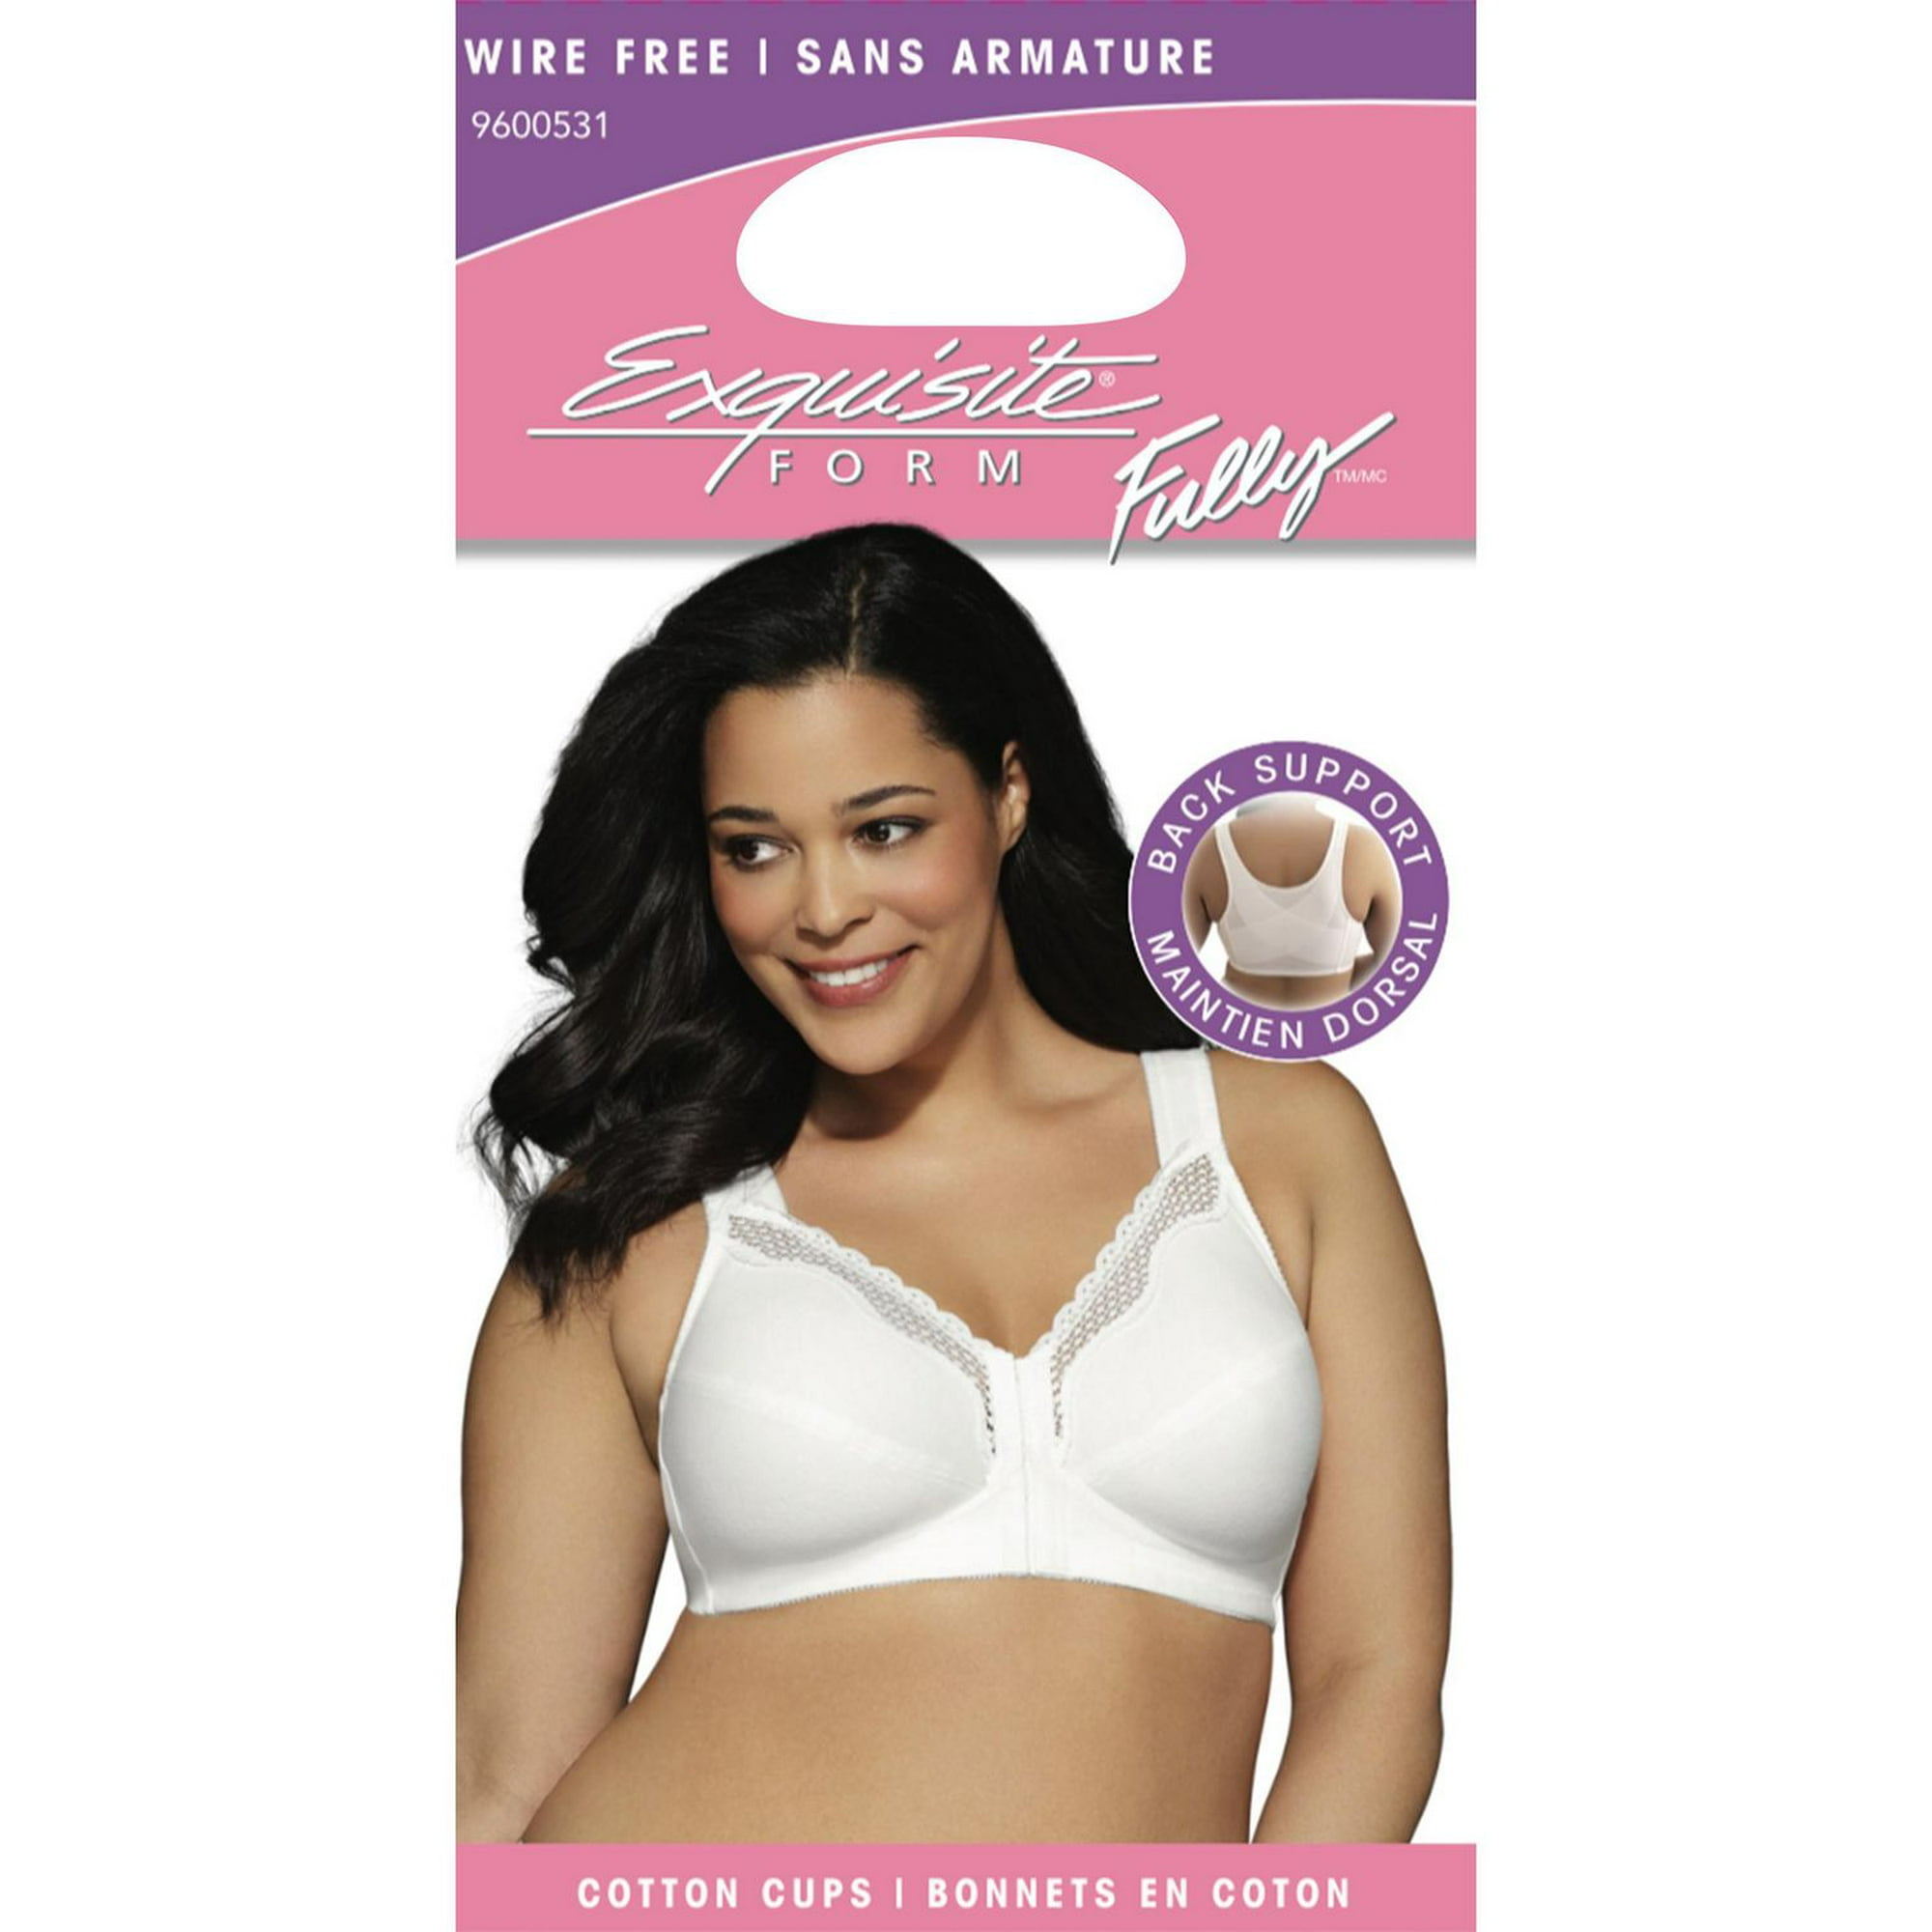 Bestform 9706770 Comfortable Unlined Wireless Cotton Bra with Front  Closure, Sizes 36B-42D